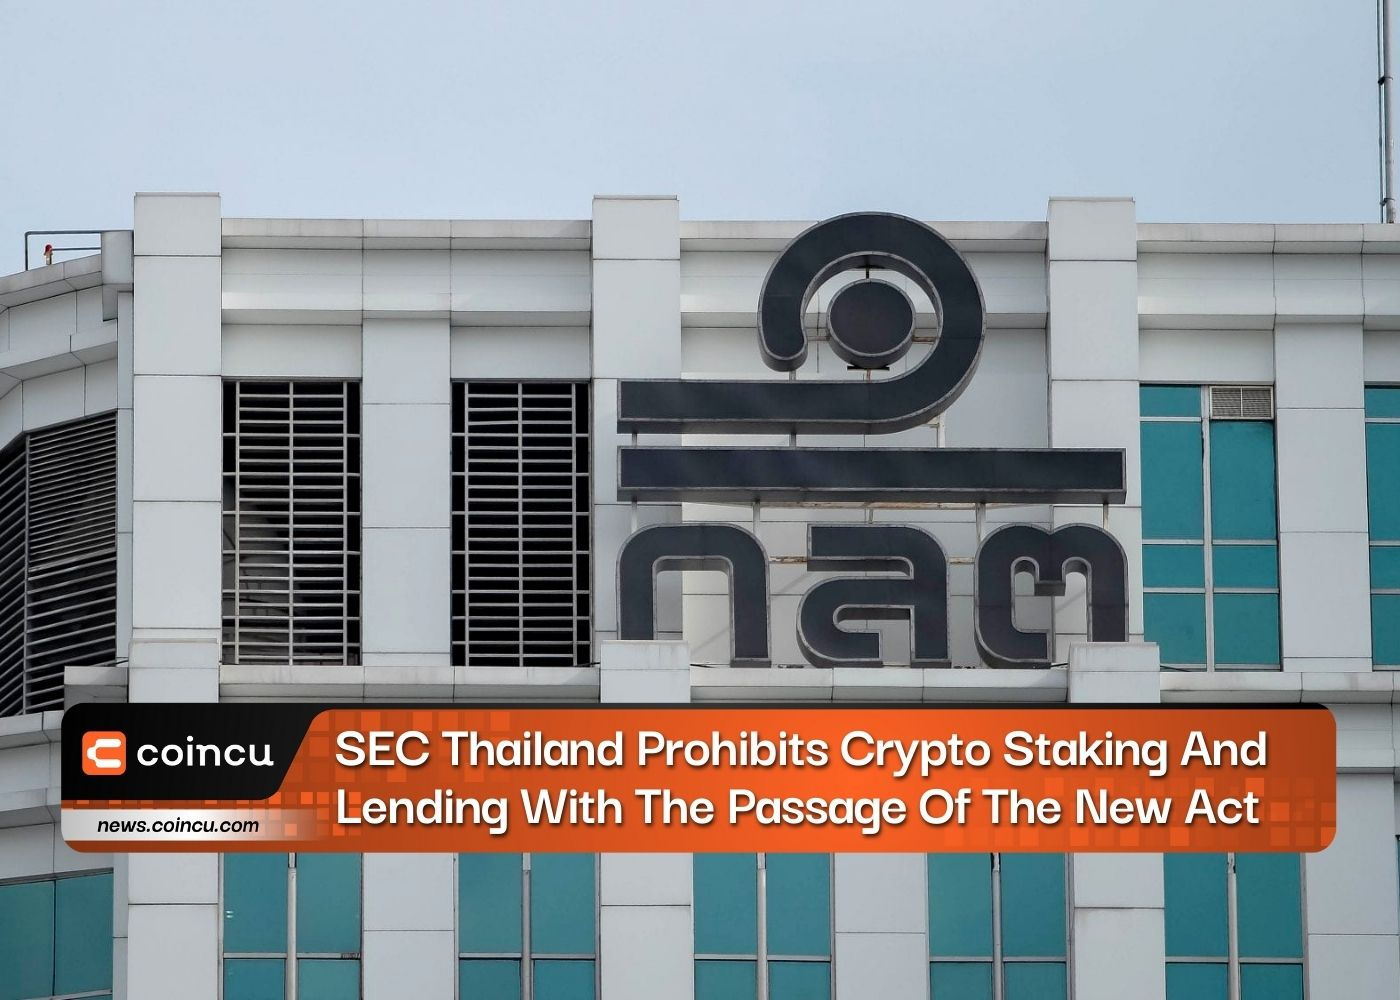 BREAKING: SEC Thailand Prohibits Crypto Staking And Lending With The Passage Of The New Act